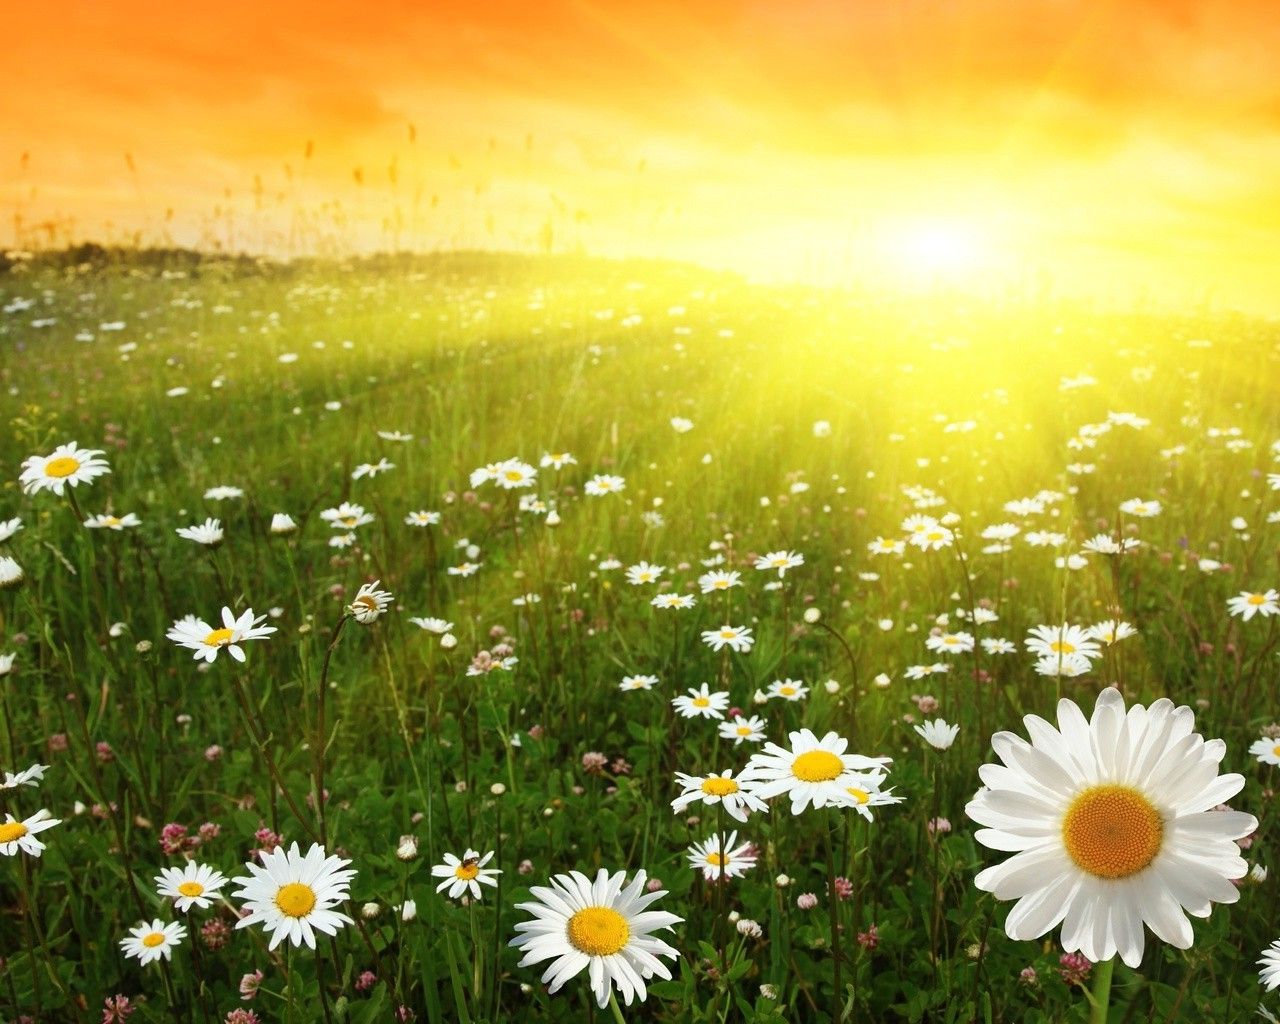 Summer, sun and a field of daisies